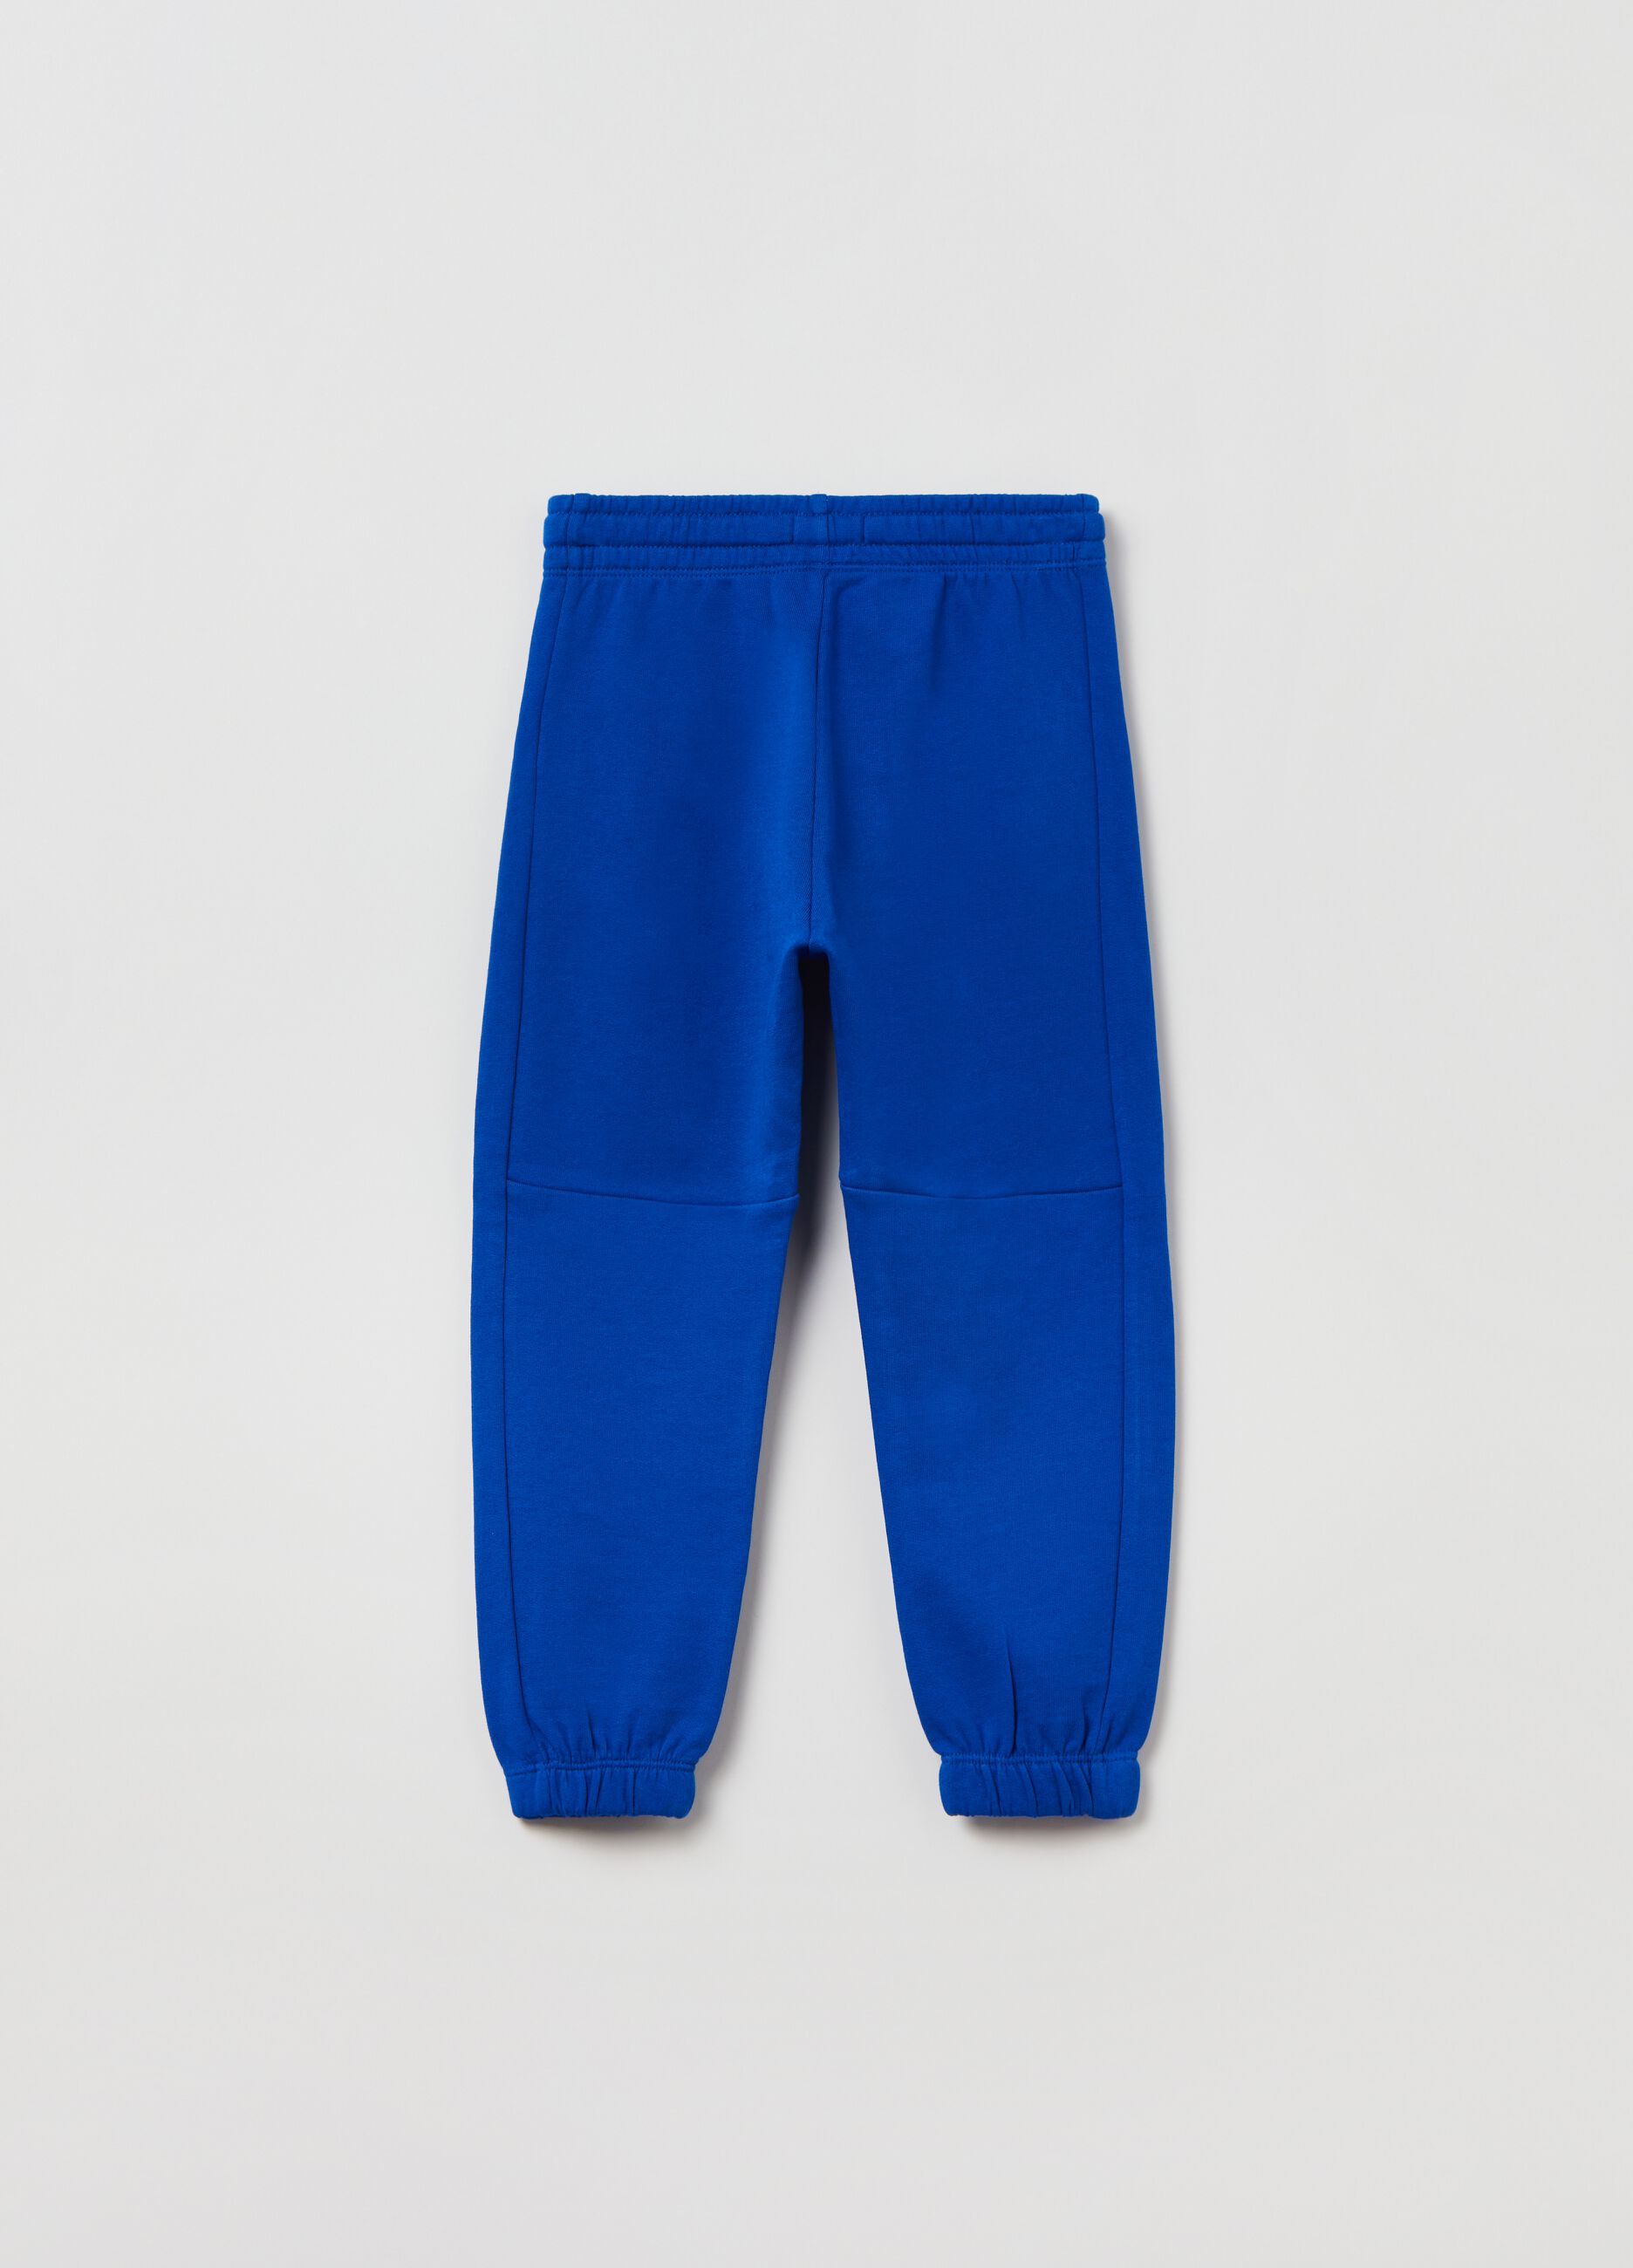 Solid colour cotton joggers with drawstring.